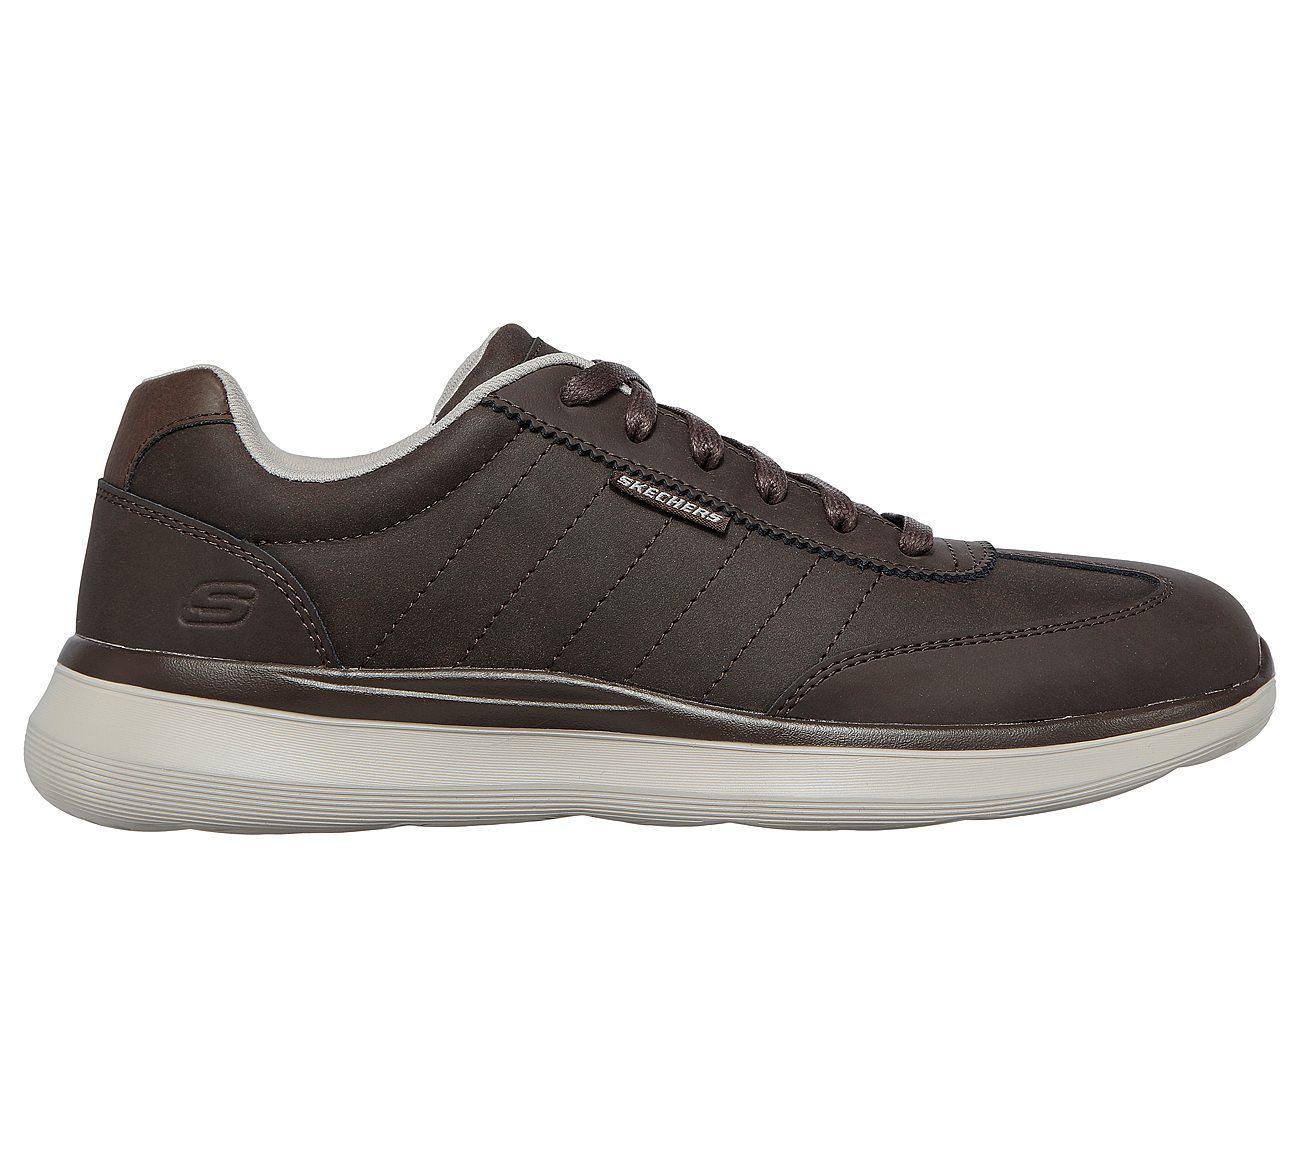 DELSON 2.0 - YORKSON, CCHOCOLATE Footwear Lateral View